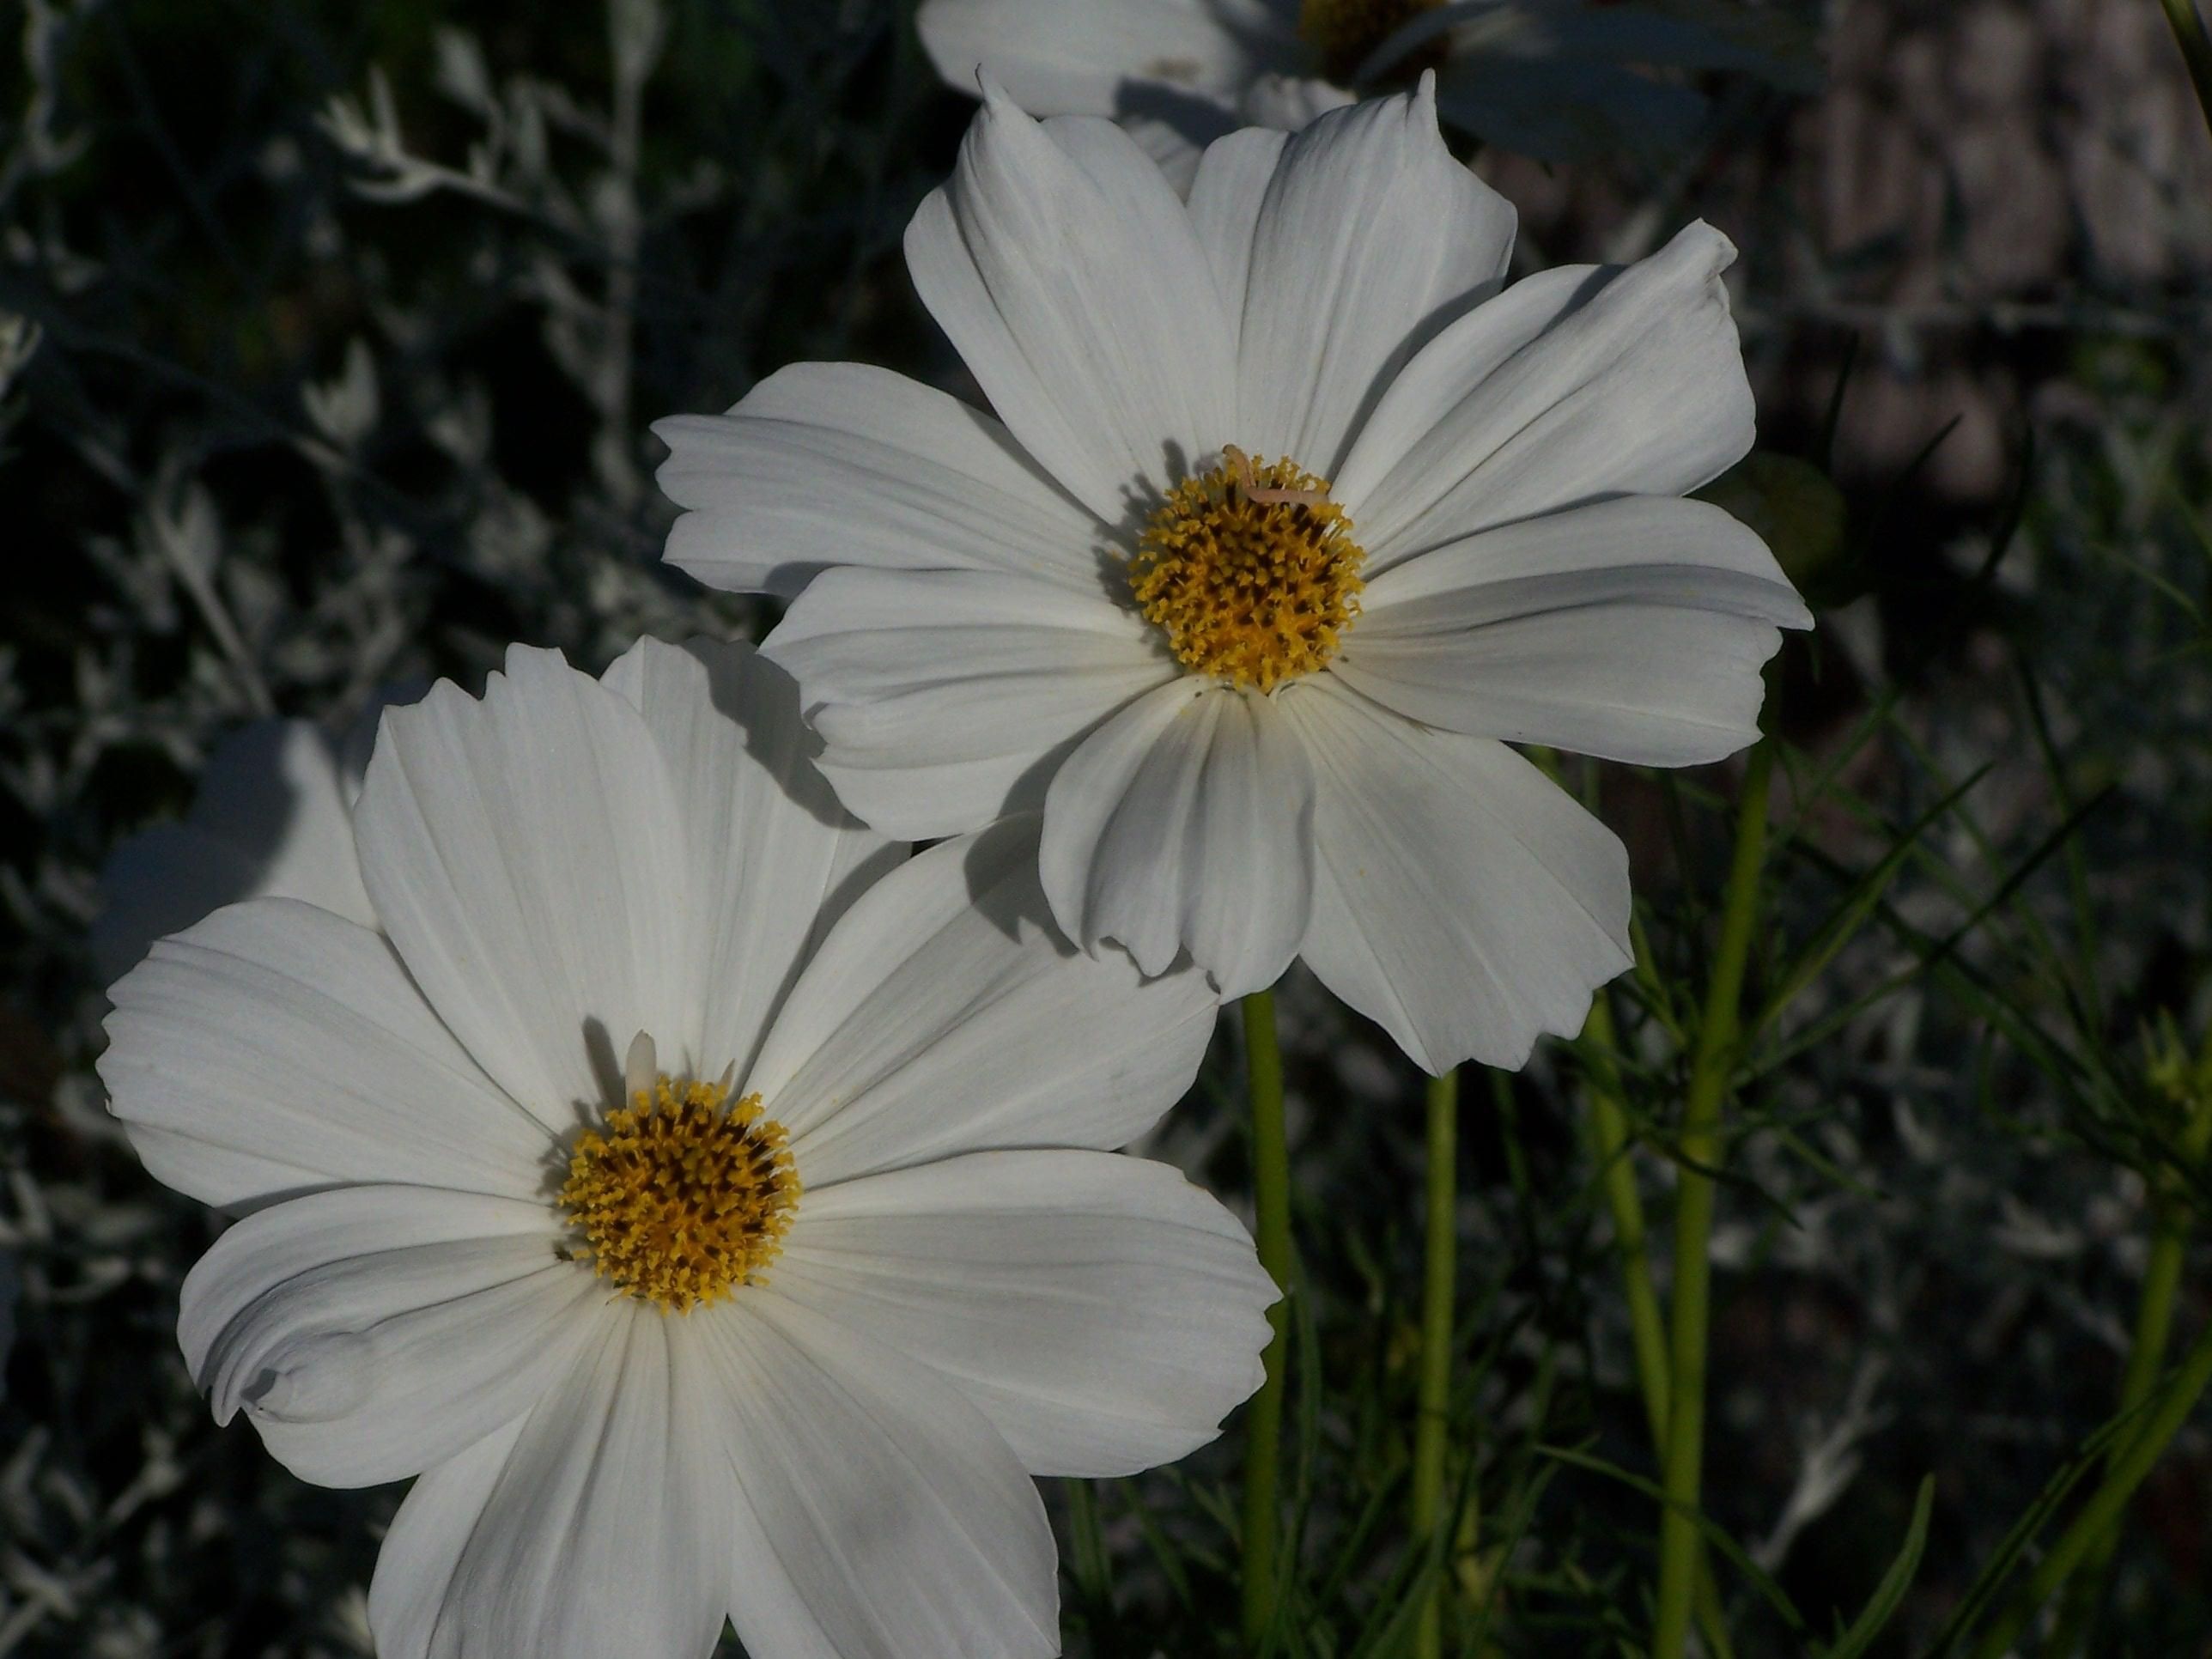 File:Two daisies plants.jpg - Wikimedia Commons